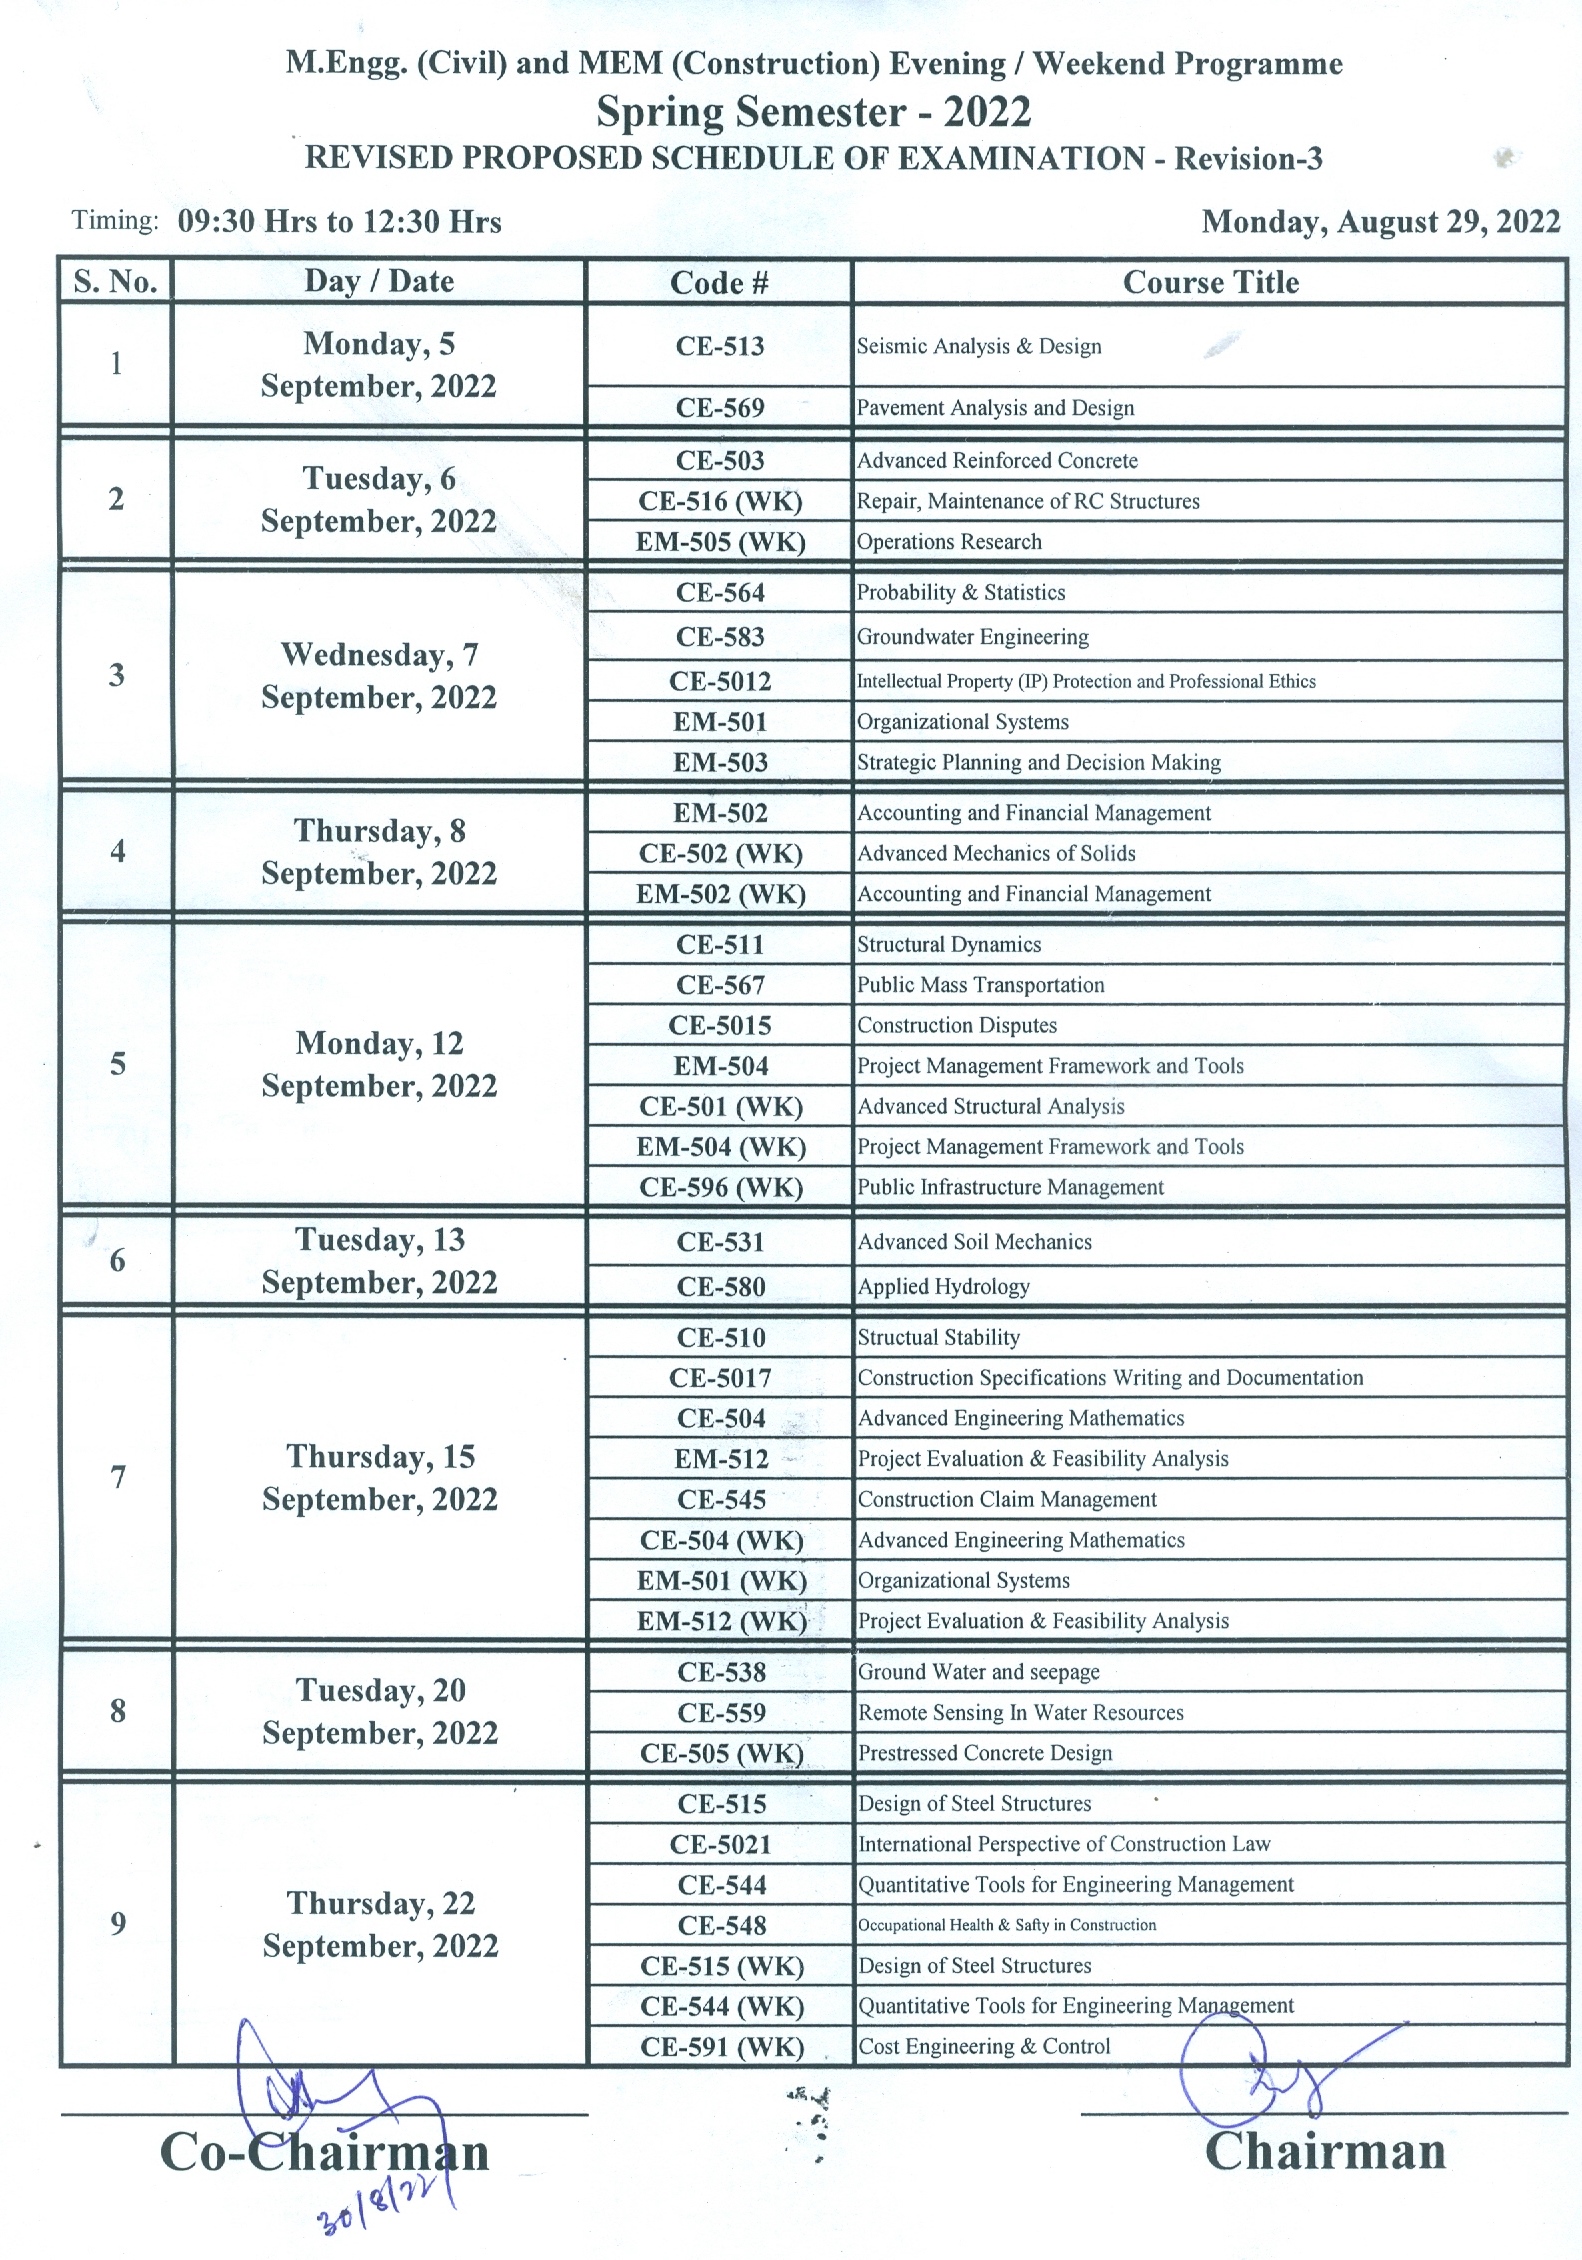 Proposed Masters Exam Timetable